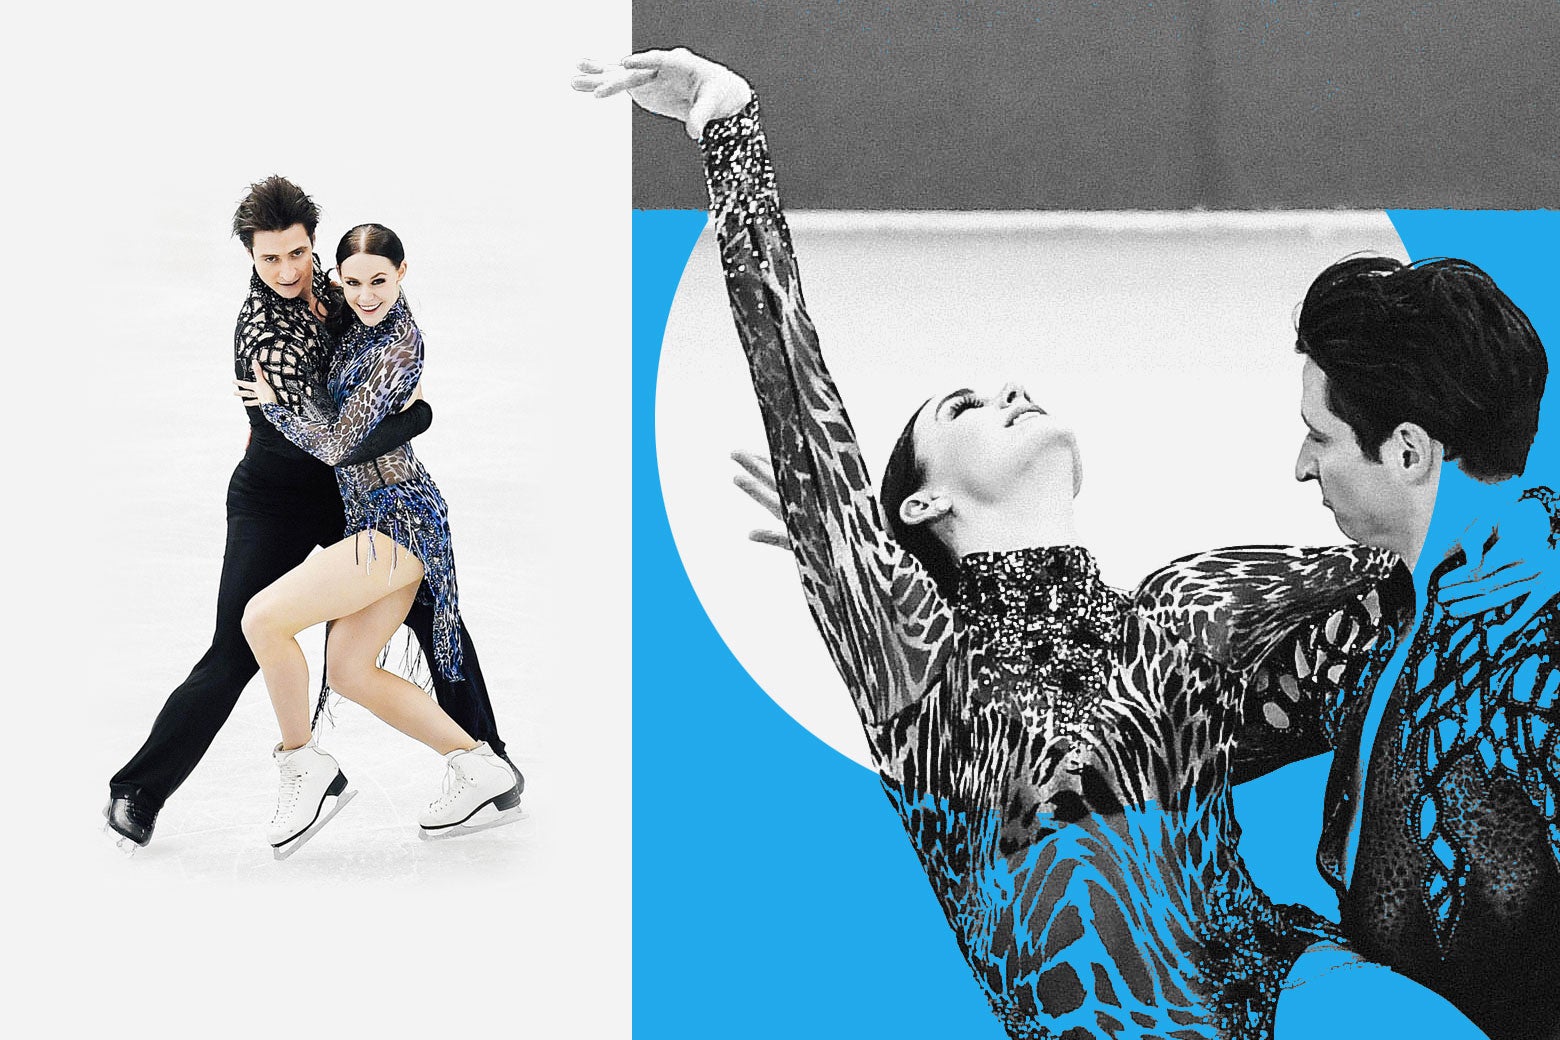 A collage of images of Tessa Virtue and Scott Moir skating.